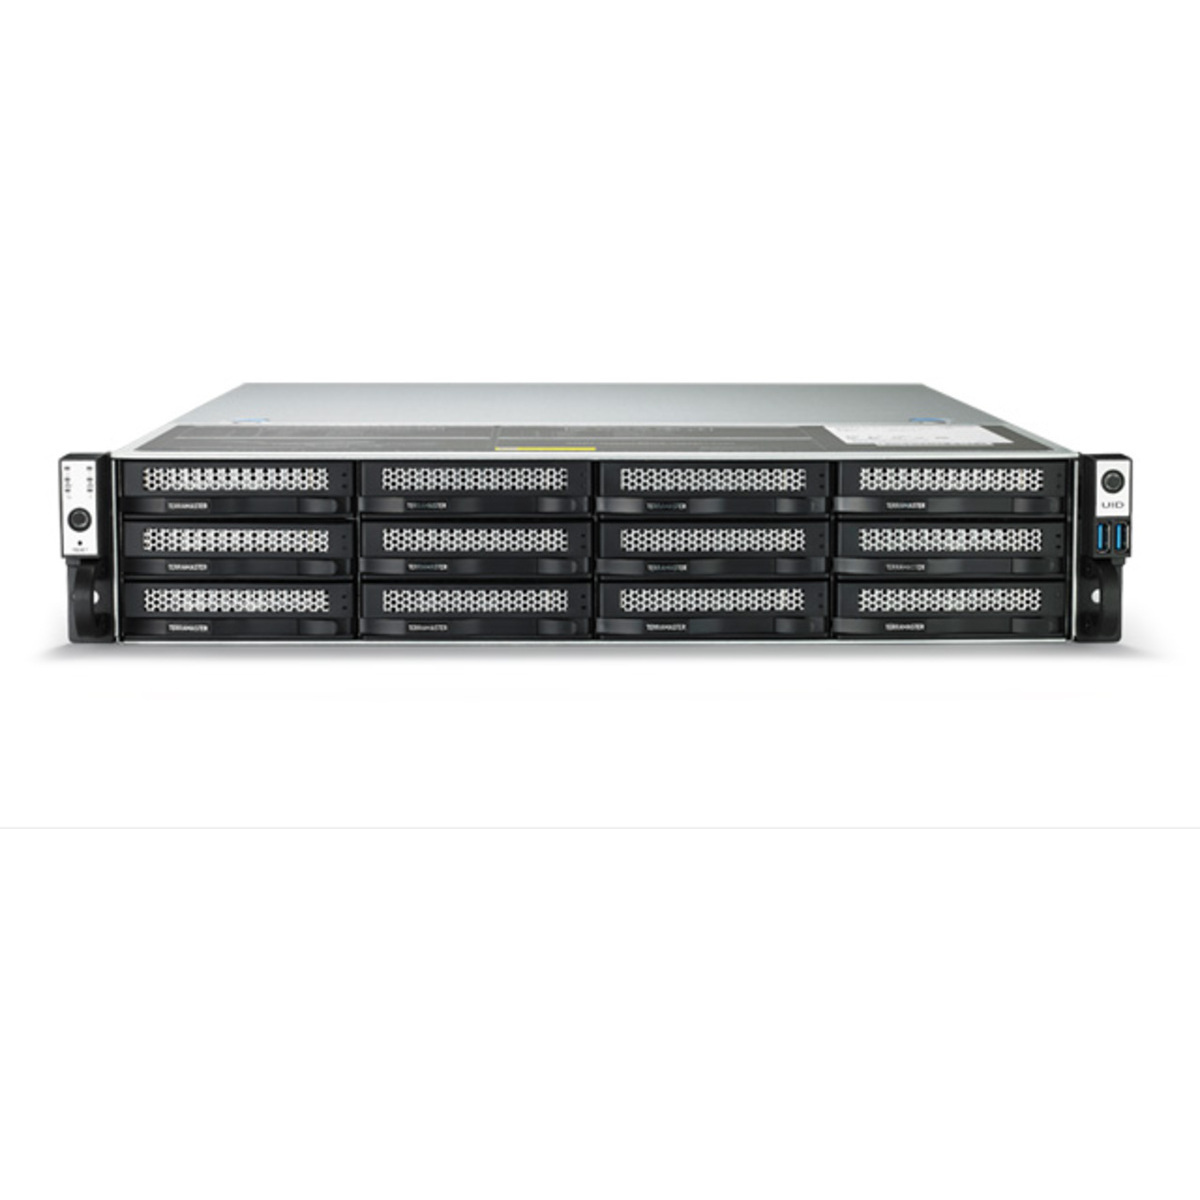 TerraMaster U12-722-2224 144tb 12-Bay RackMount Large Business / Enterprise NAS - Network Attached Storage Device 12x12tb Seagate EXOS X18 ST12000NM000J 3.5 7200rpm SATA 6Gb/s HDD ENTERPRISE Class Drives Installed - Burn-In Tested U12-722-2224